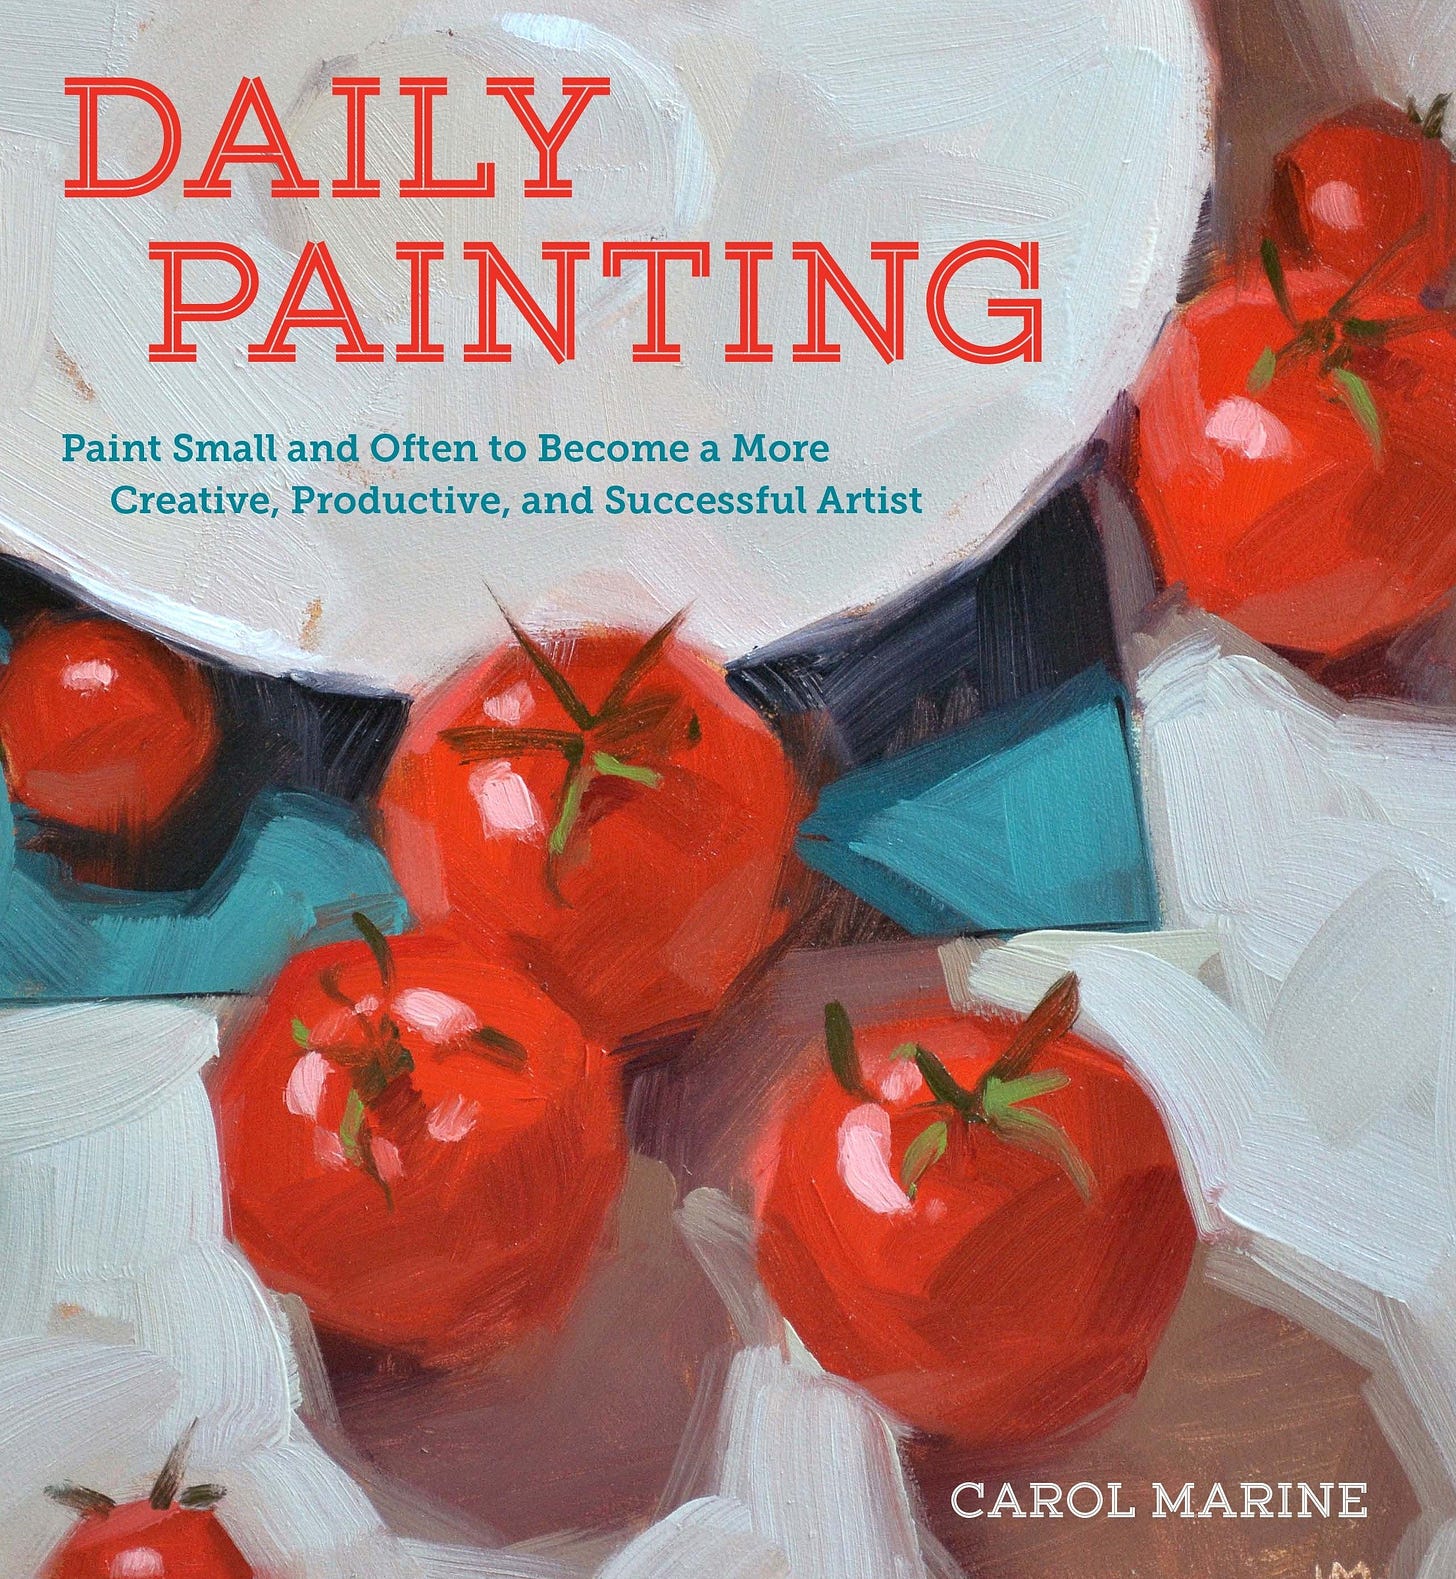 Daily Painting: Paint Small and Often To Become a More Creative,  Productive, and Successful Artist : Marine, Carol: Amazon.co.uk: Books